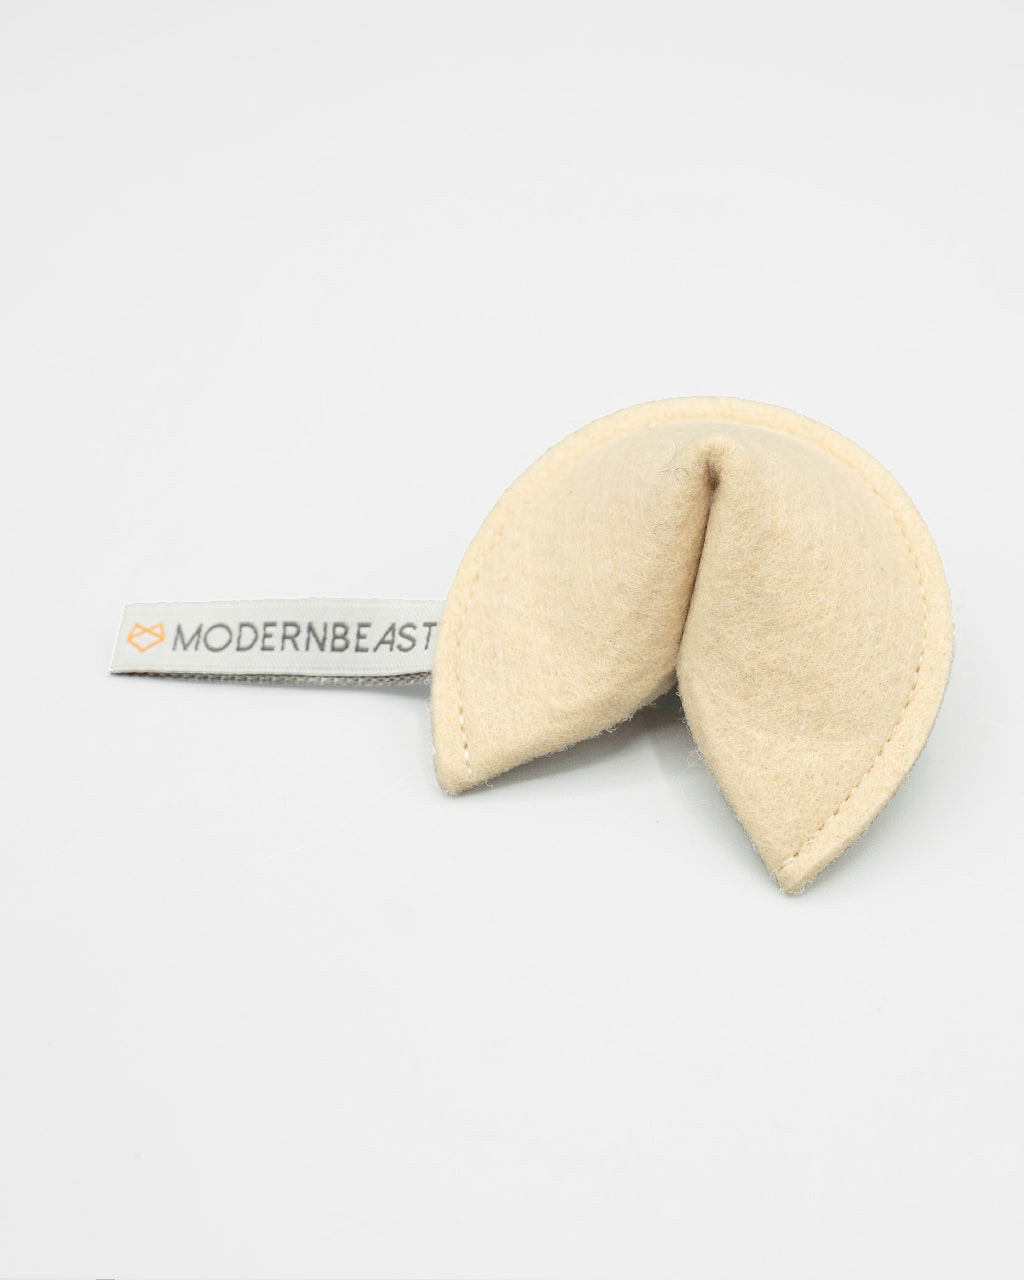 KITTY TOY FORTUNE COOKIE - You Will Catch The Mouse by MODERNBEAST